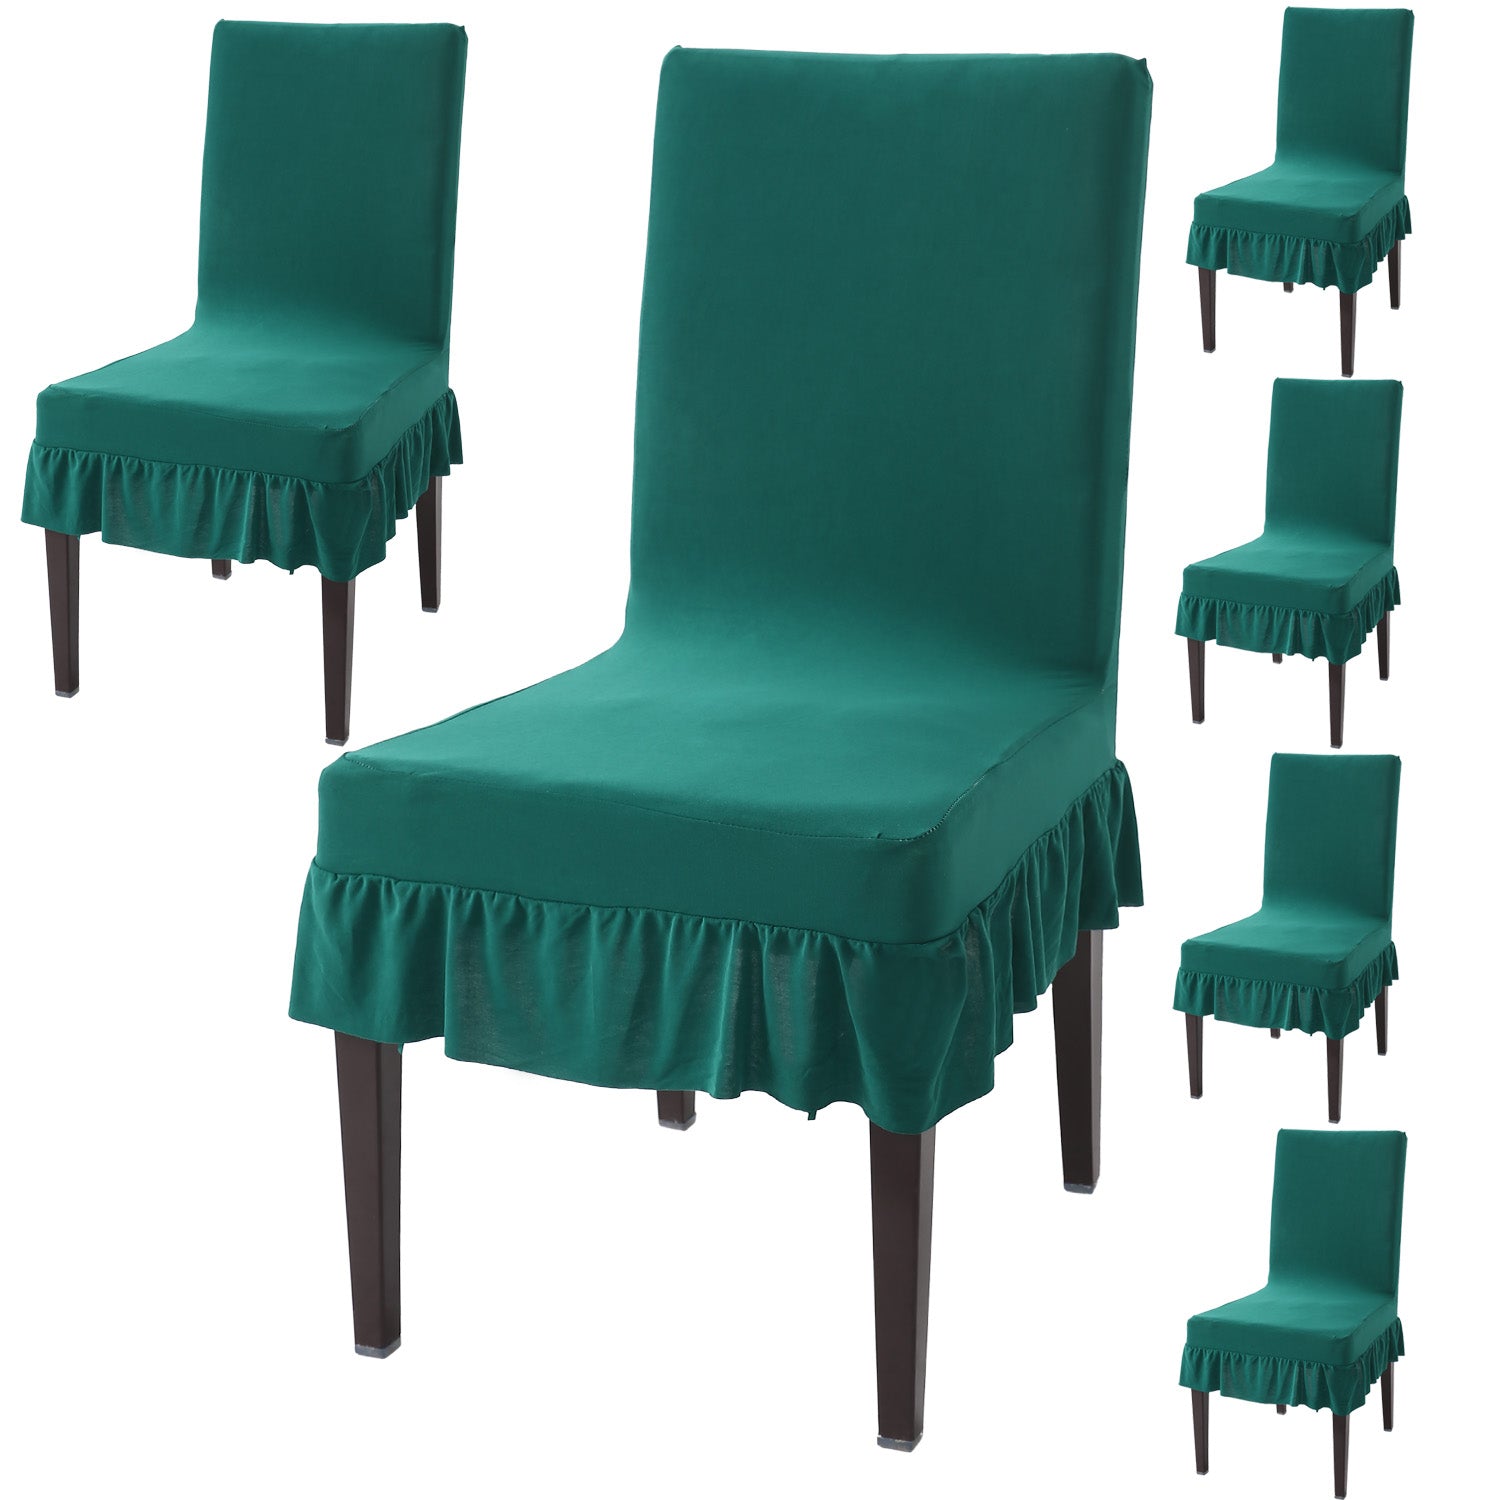 Elastic Stretchable Dining Chair Cover with Frill, Teal